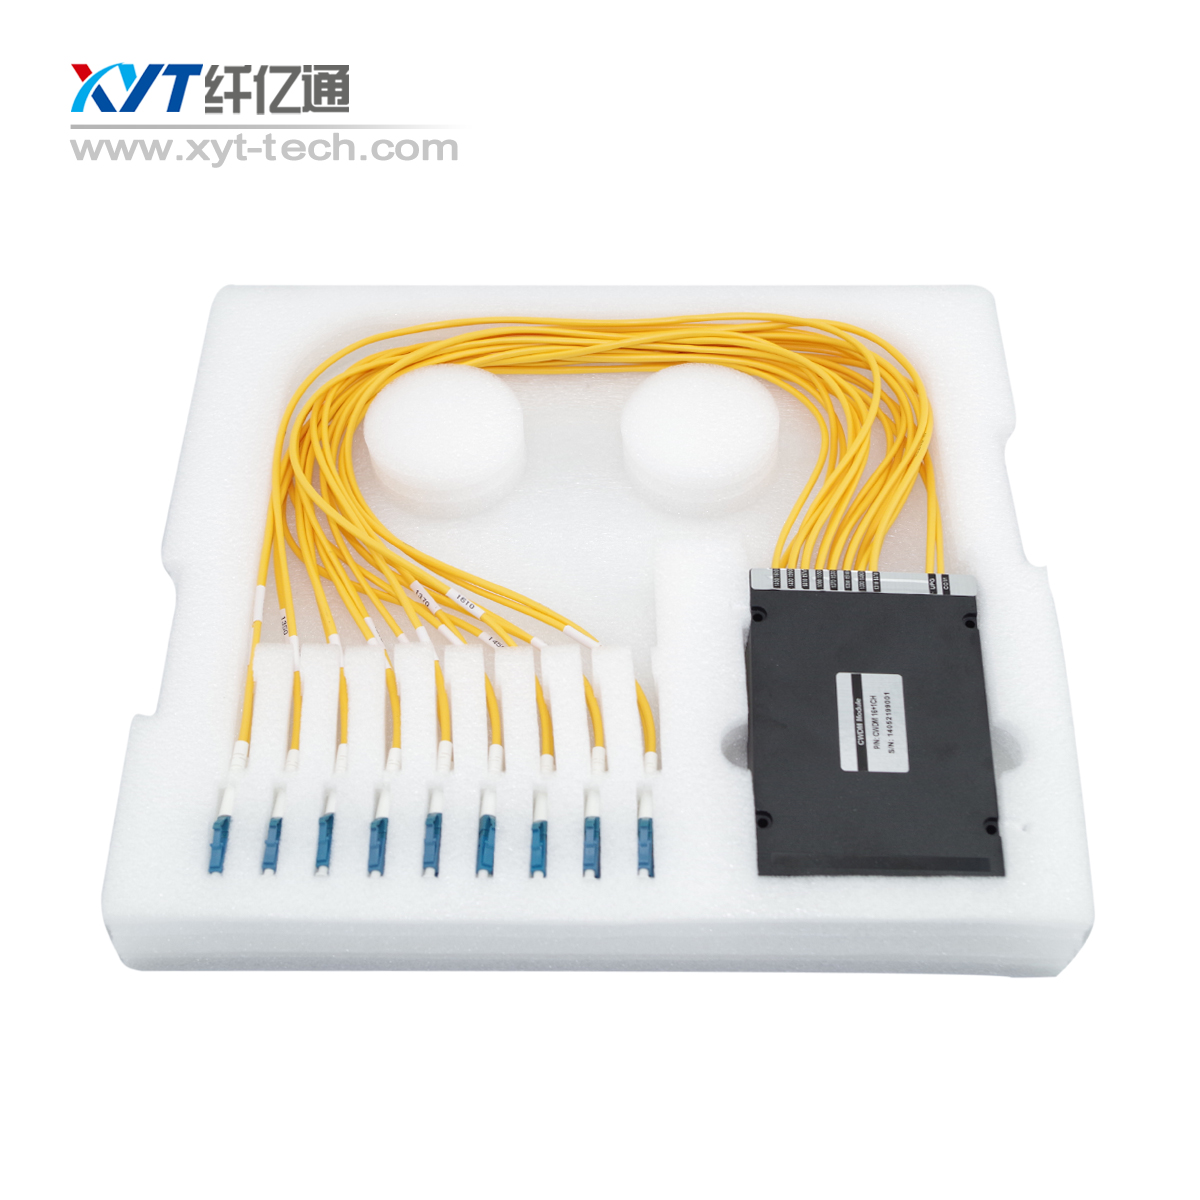 CWDM System 5 channel MUX Pssive CWDM DEMUX Filter Type Single Fiber Optical Multiplexer With Mon And EXP Port